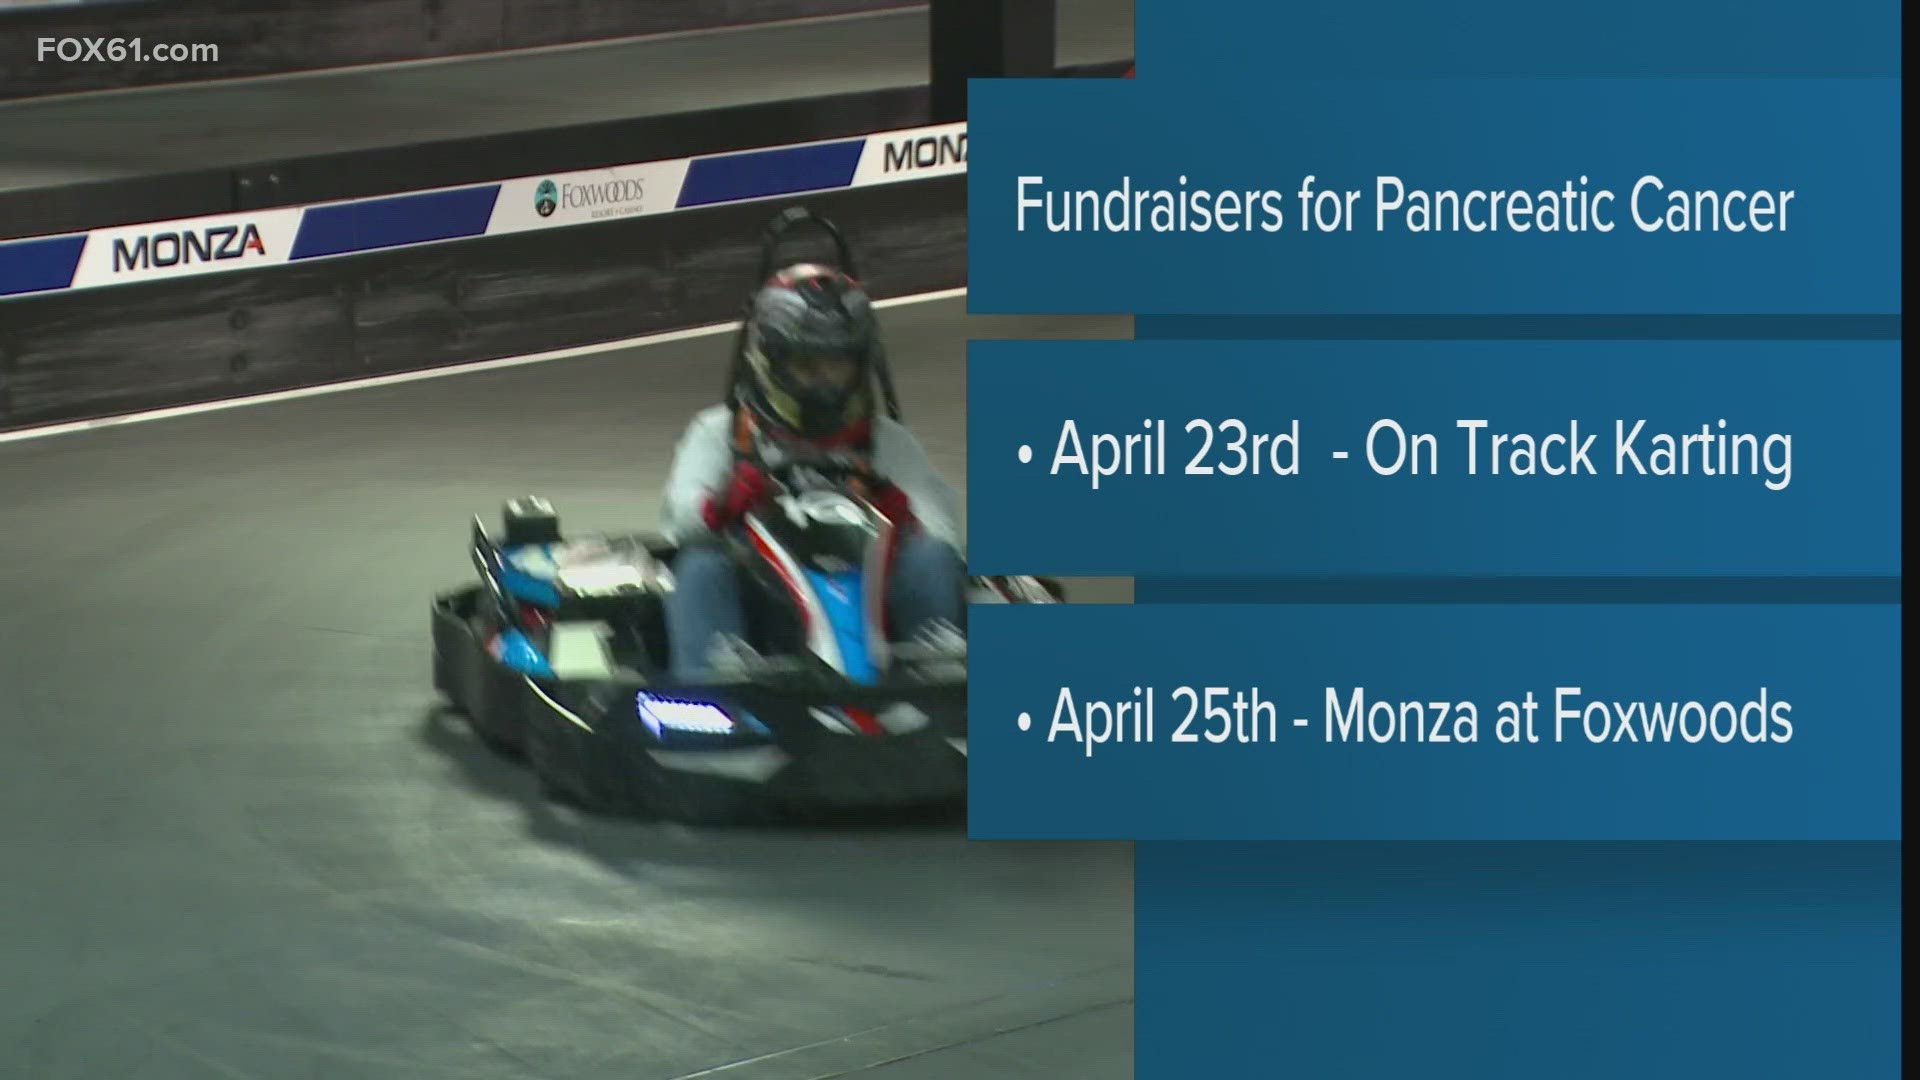 Ron Foley Foundation and On Track Karting in Wallingford/Monza at Foxwoods are holding a go-karting fundraiser to raise money for Pancreatic Cancer Awareness.